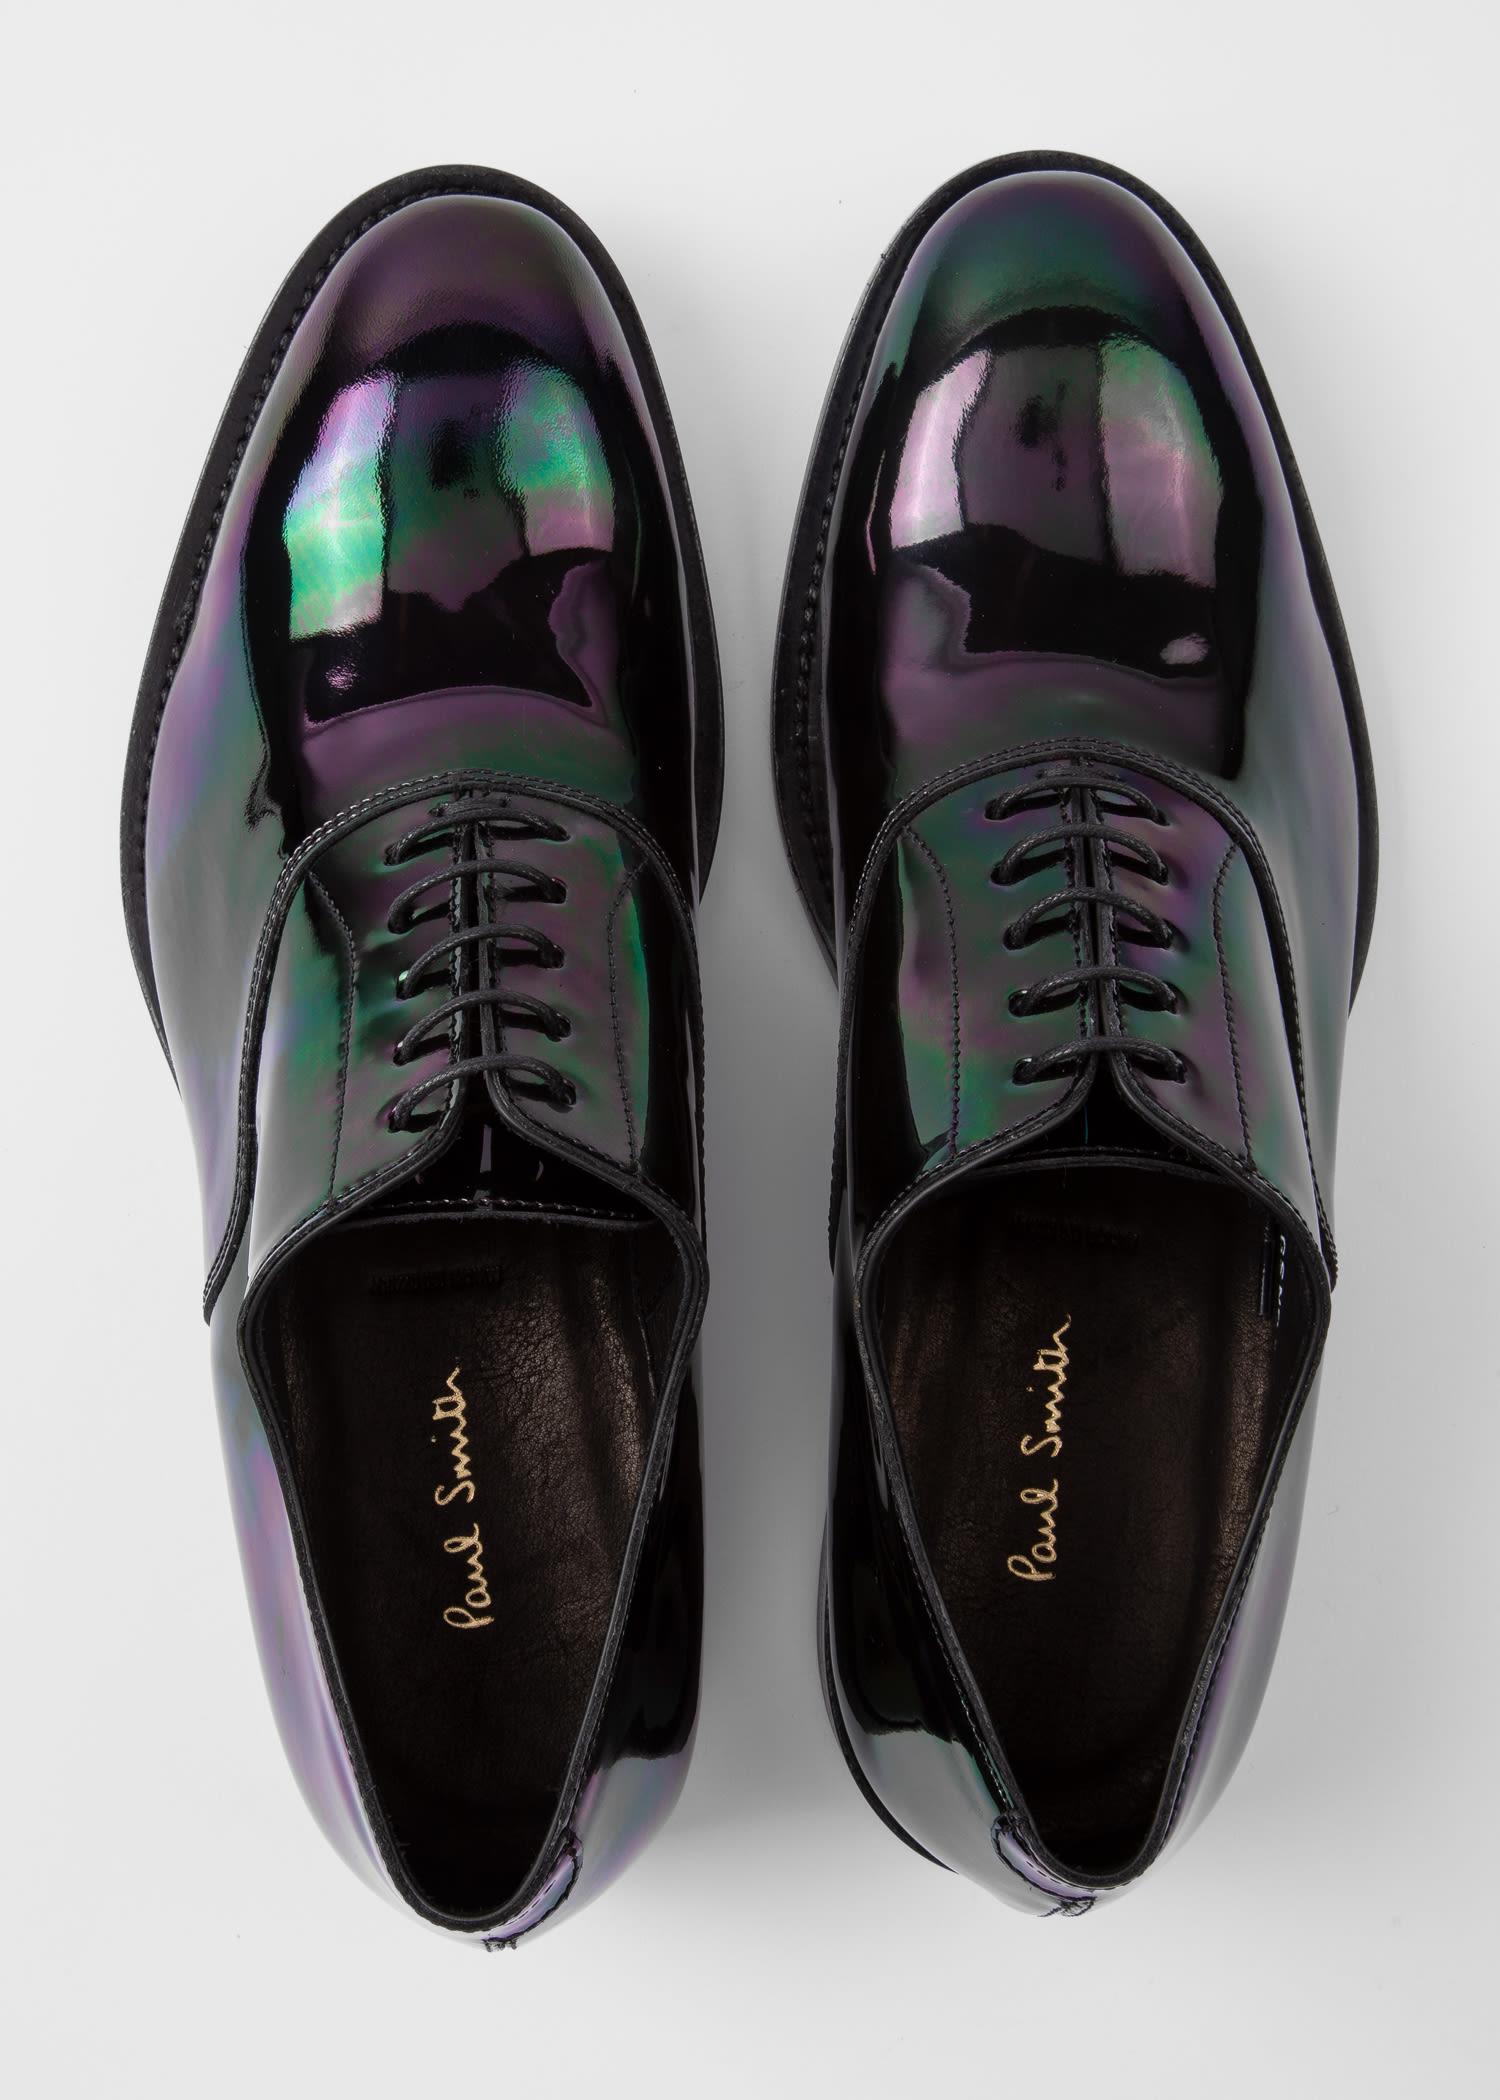 Paul Smith Iridescent Black Leather 'gershwin' Oxford Shoes for Men - Lyst